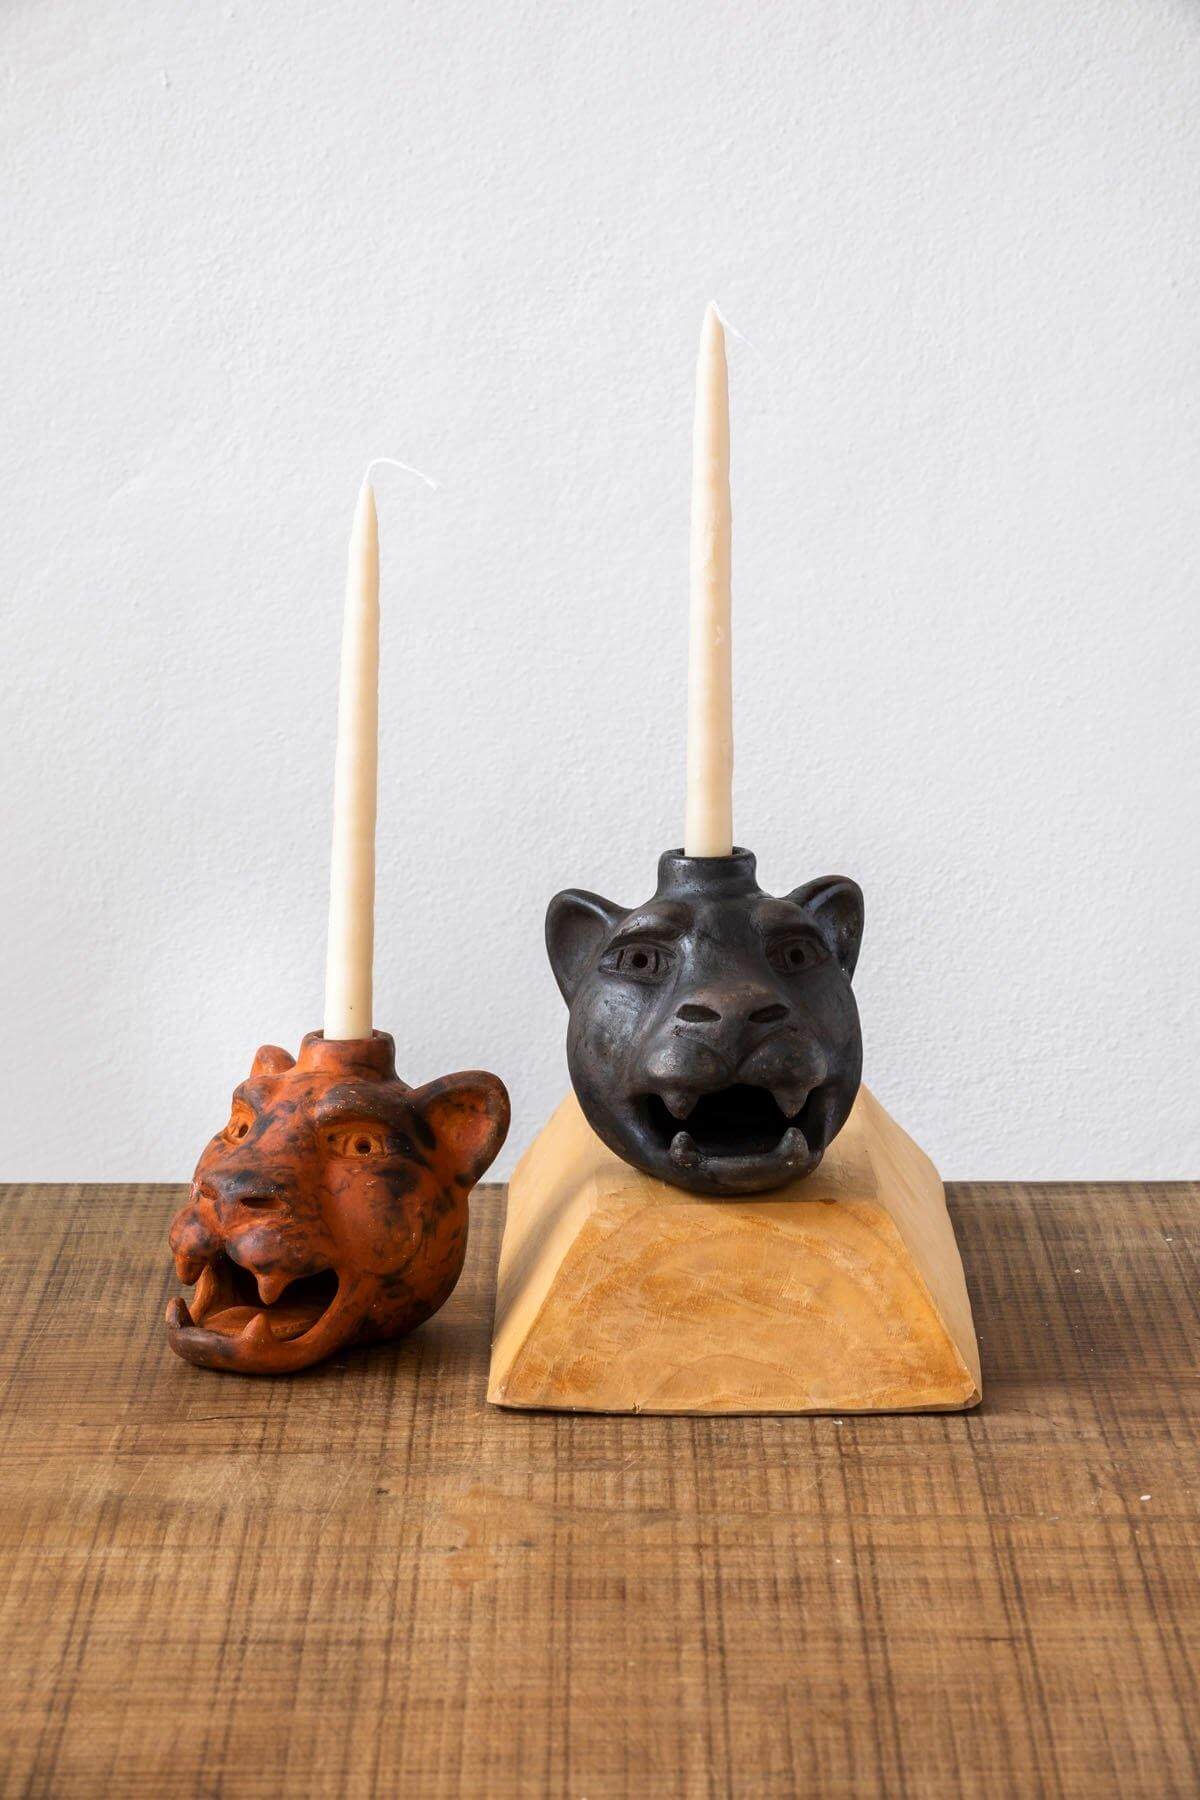 The Blackout Jaguar Head Candle Holder by Andrea Garcia - Wool+Clay